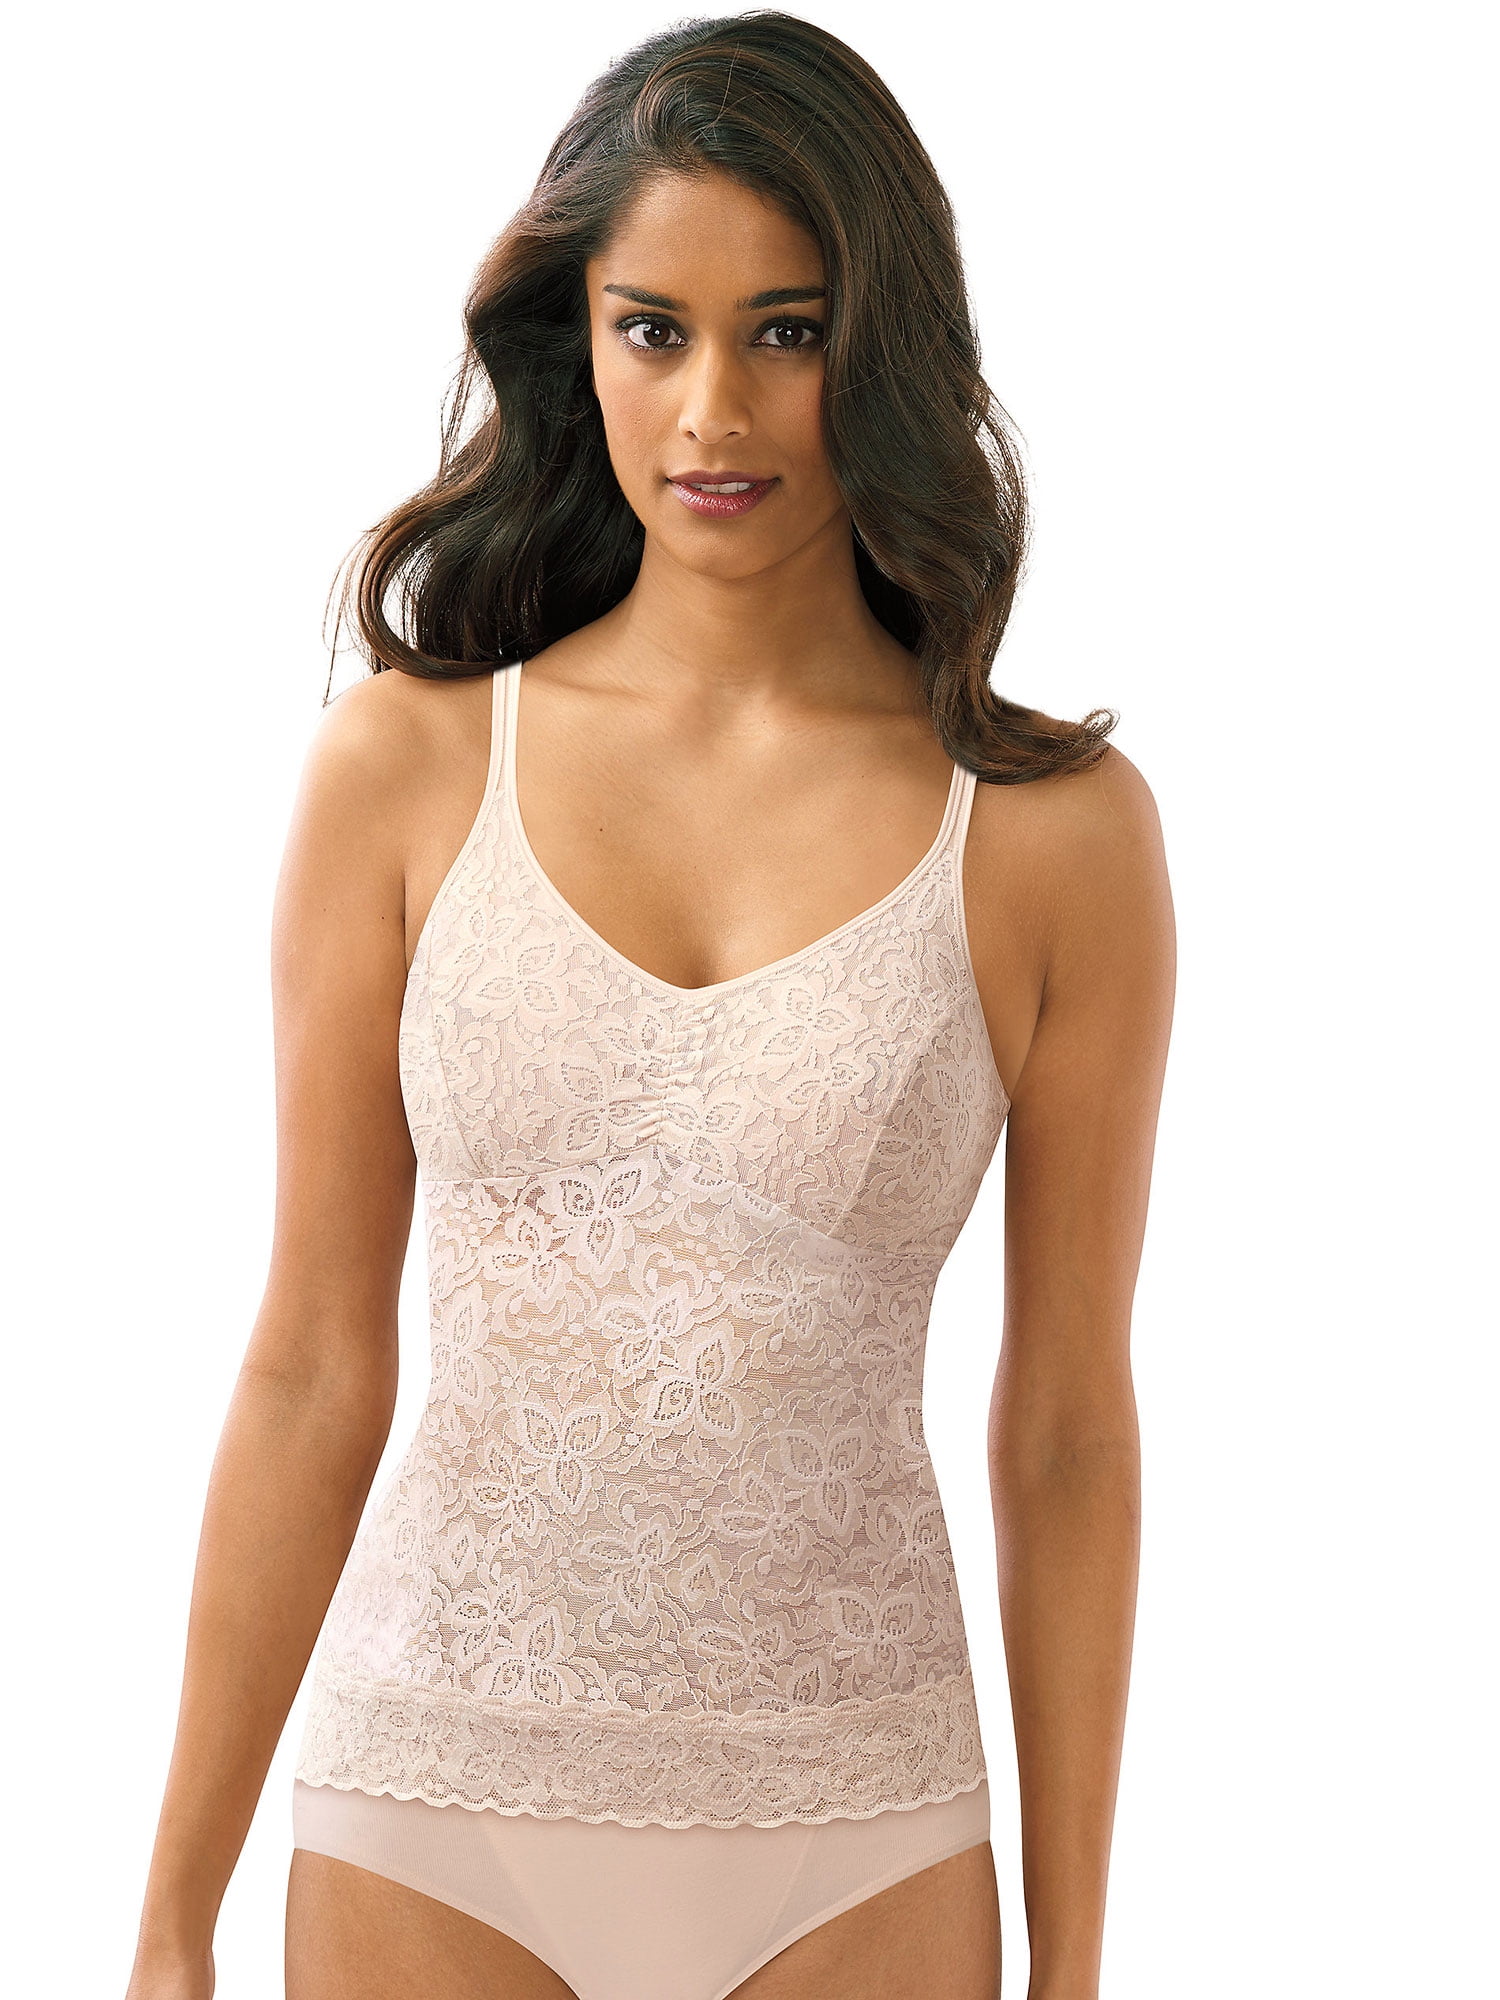 Vanity Fair White Camisoles & Camisole Sets for Women for sale